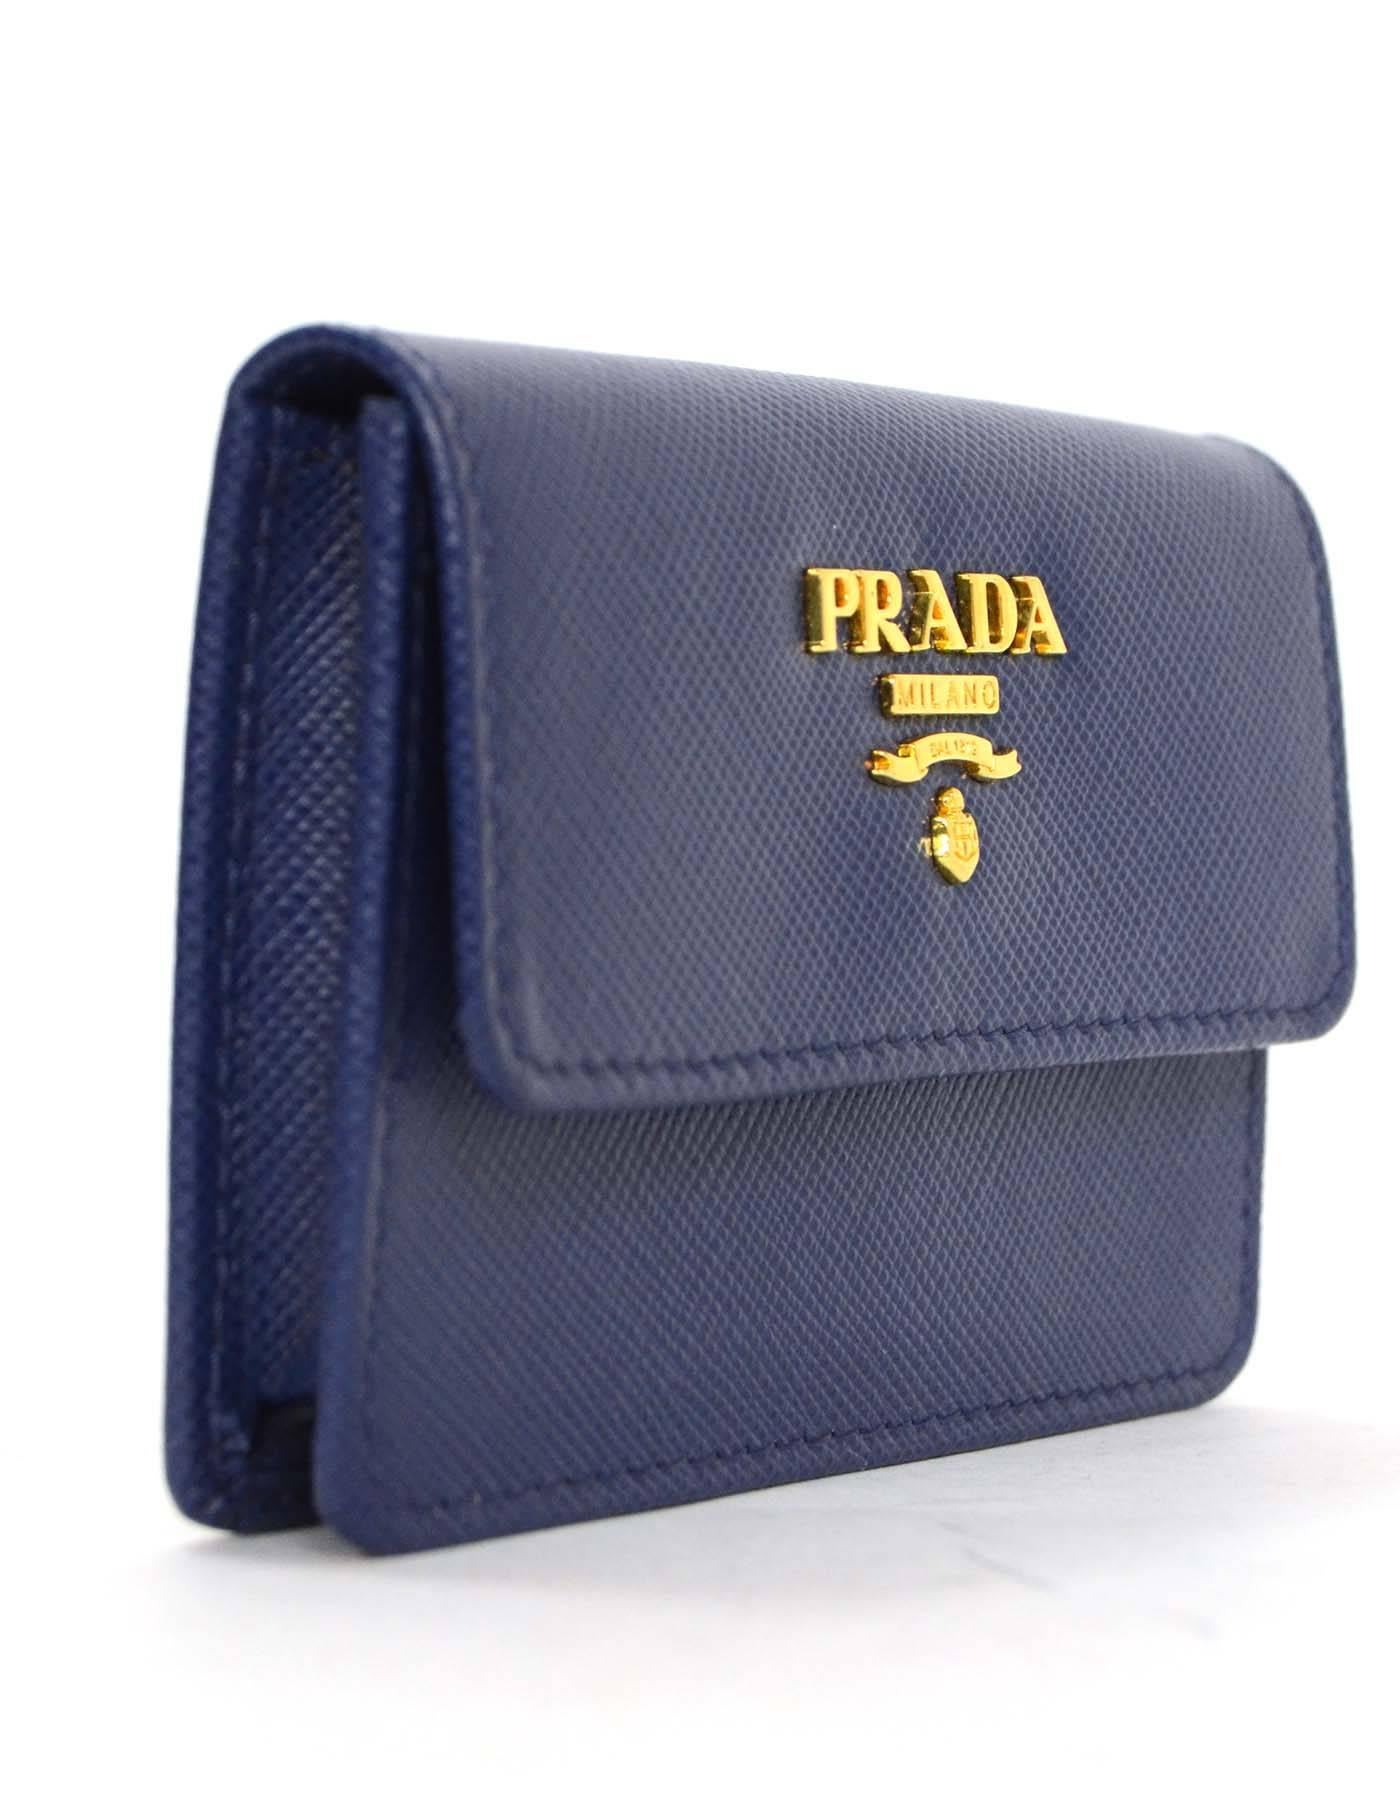 Prada Blue Saffiano Card Holder 
Features goldtone Prada logo on flap top
Made In: Italy
Color: Blue
Hardware: Goldtone
Materials: Saffiano leather
Closure/Opening: Flap top with snap closure
Exterior Pockets: None
Interior Pockets: